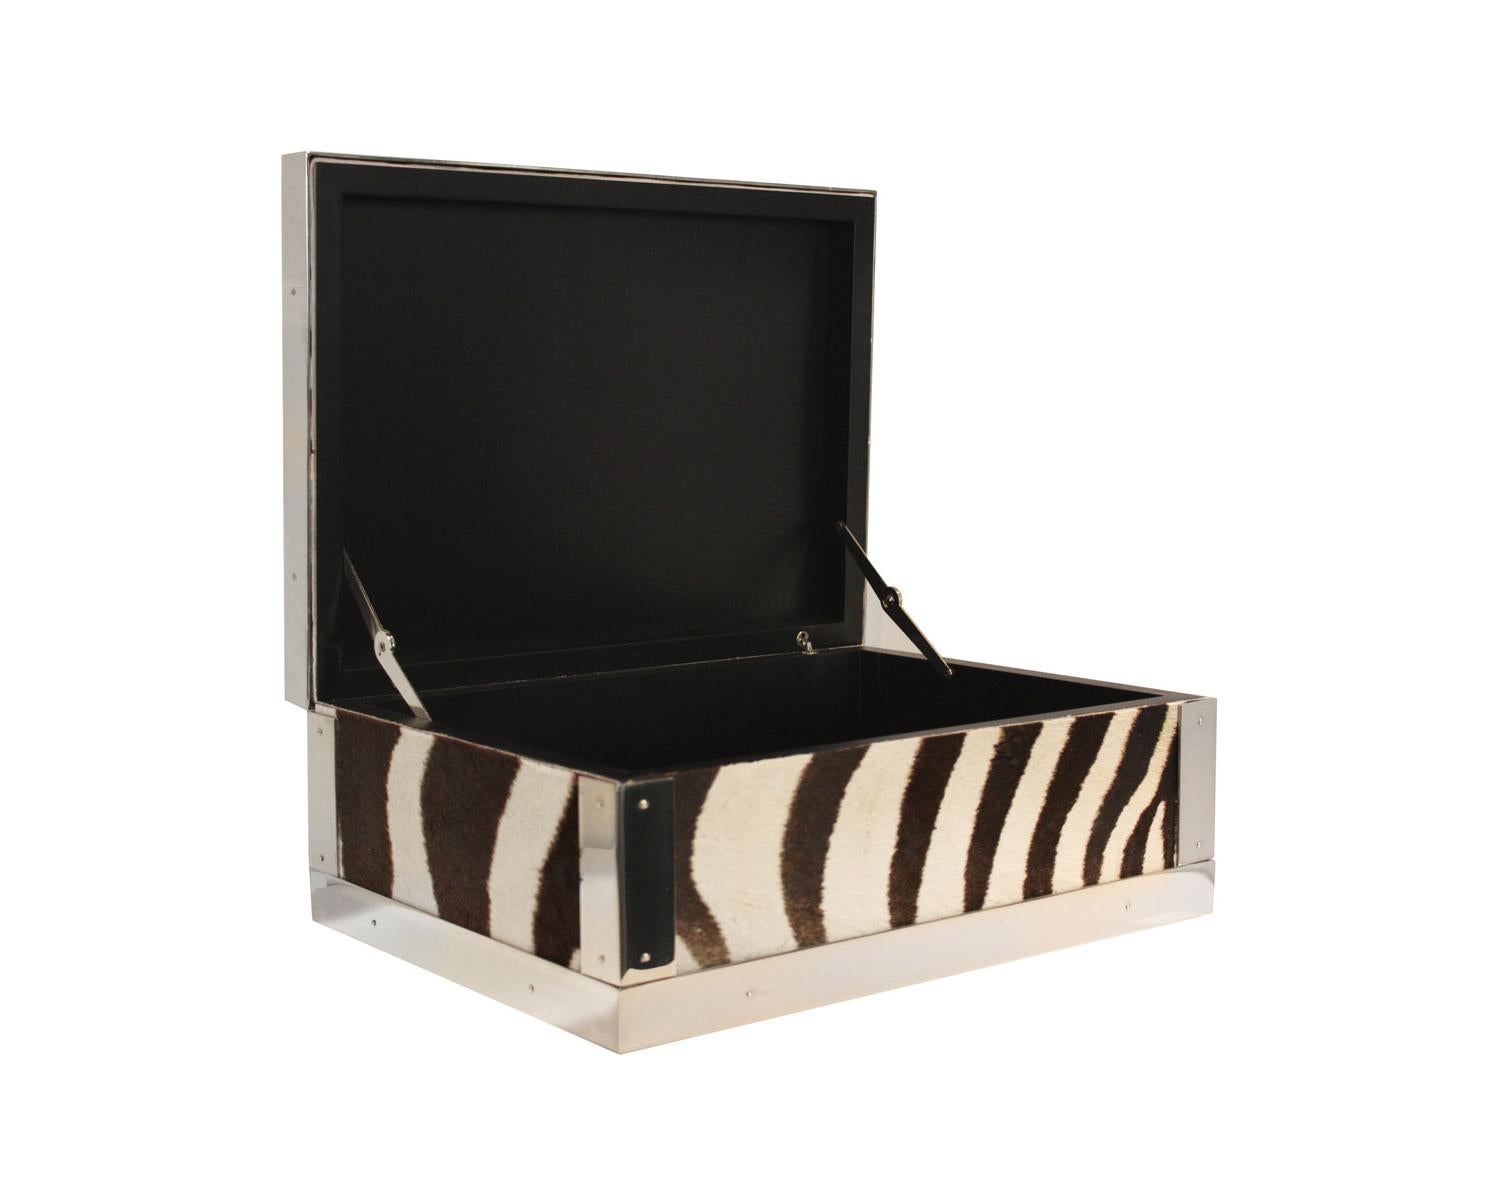 Rectangular wooden box upholstered in genuine zebra leather with metal trims in polished brass nickel plated, mirror finished. One side hinged. 
Genuinely handcrafted in Italy by our artisans.
A statement piece that will enhance every coffee table